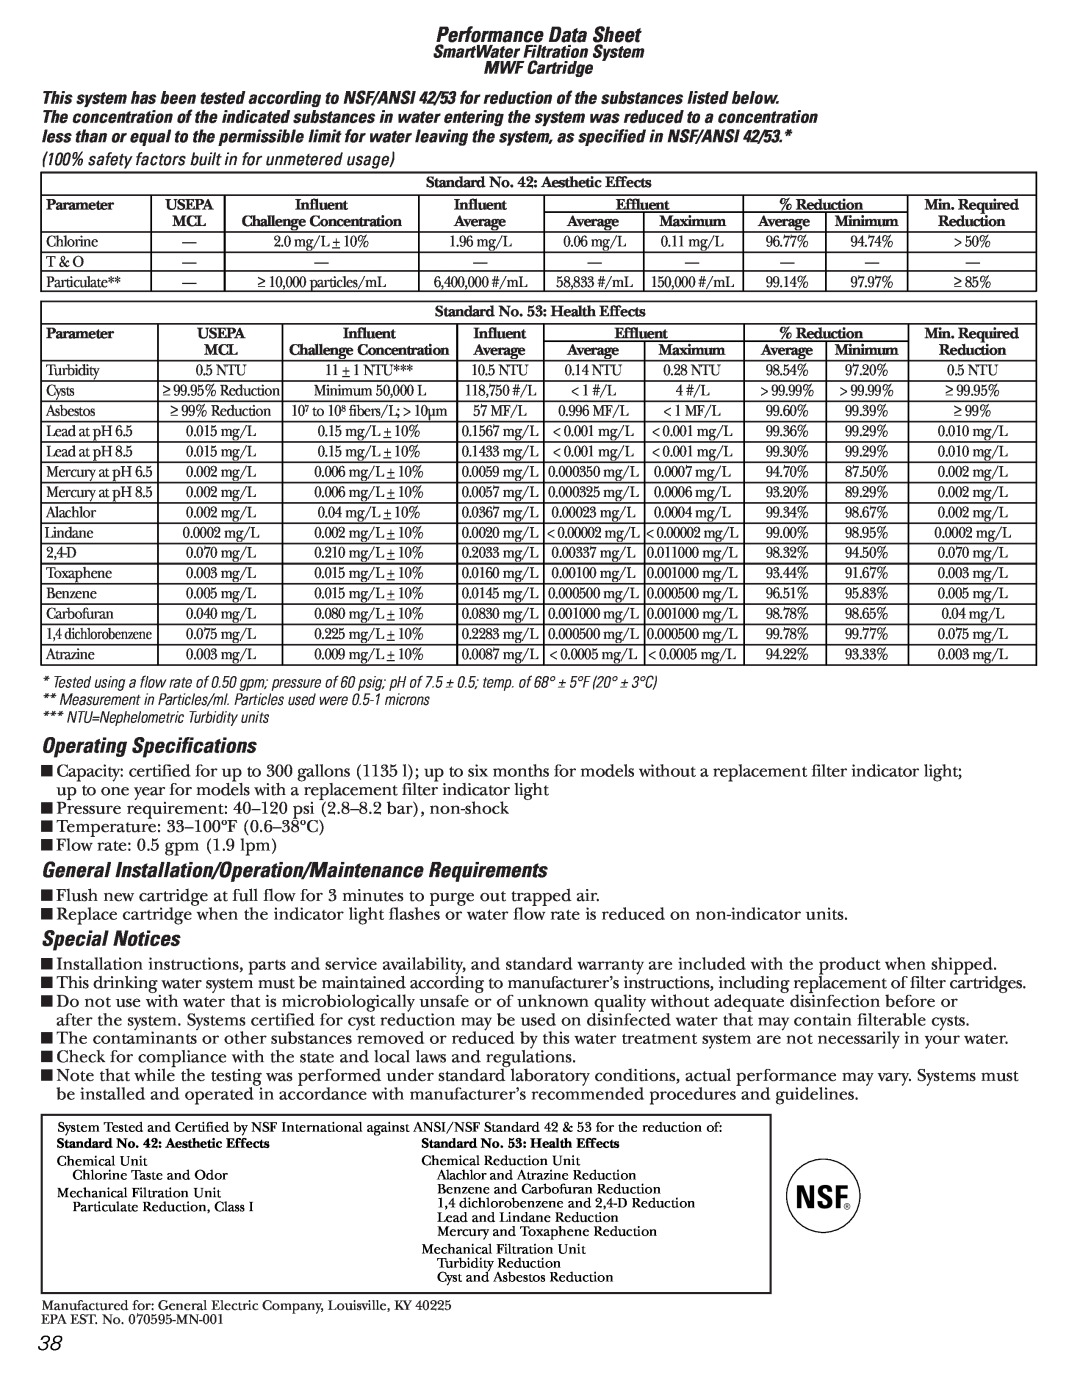 GE MODELS 23 AND 25 installation instructions Performance Data Sheet, Operating Specifications, Special Notices 